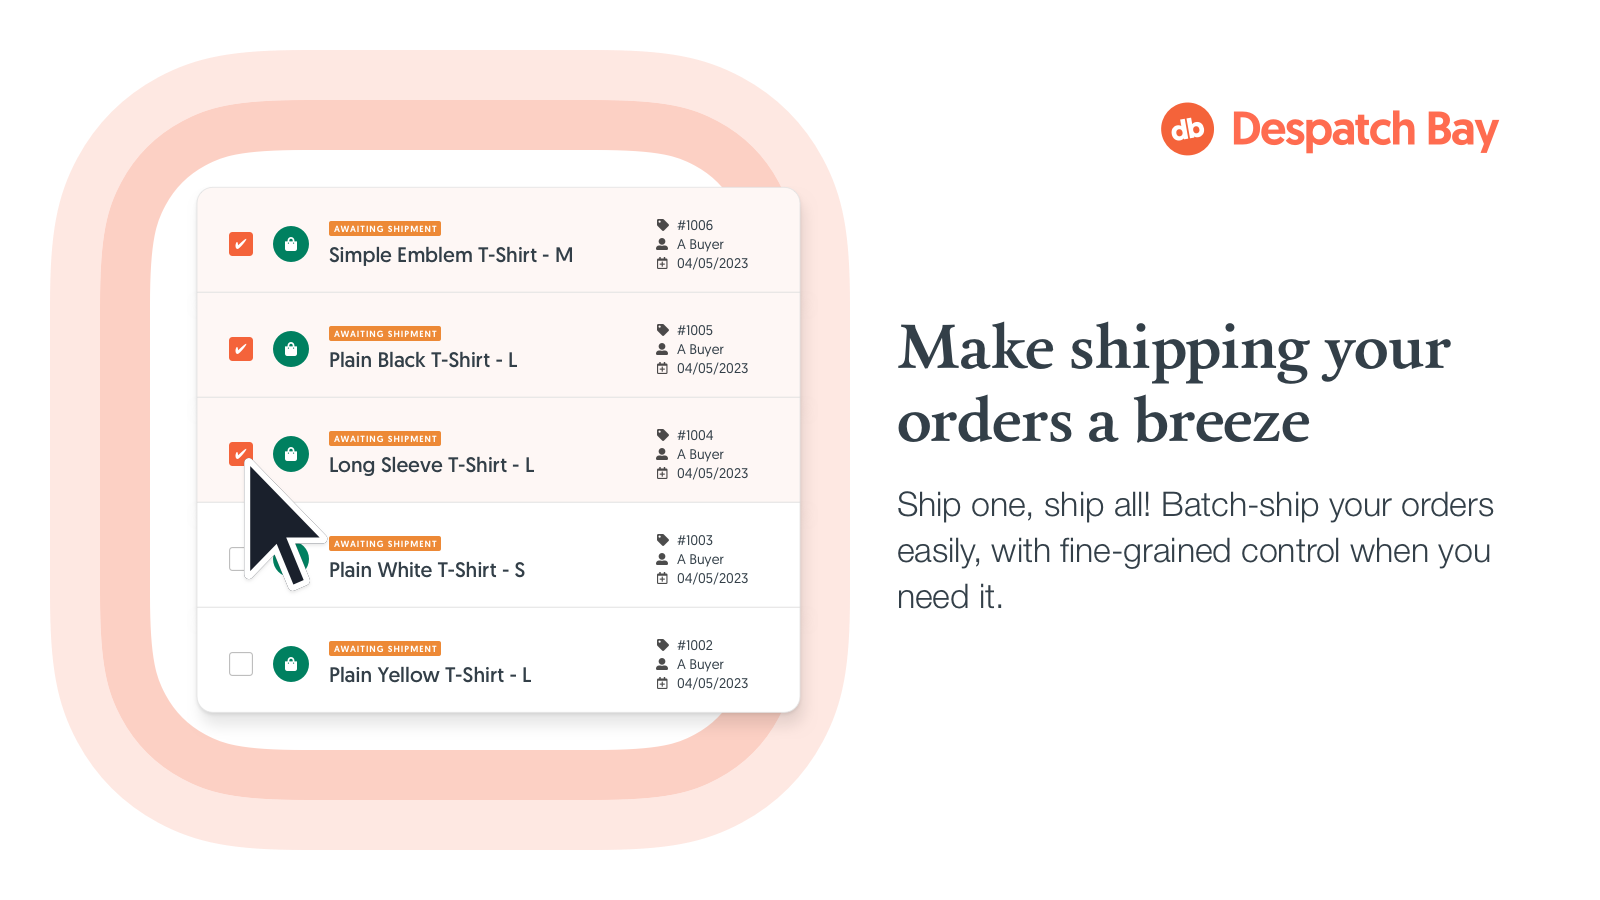 Ship all of your orders in seconds